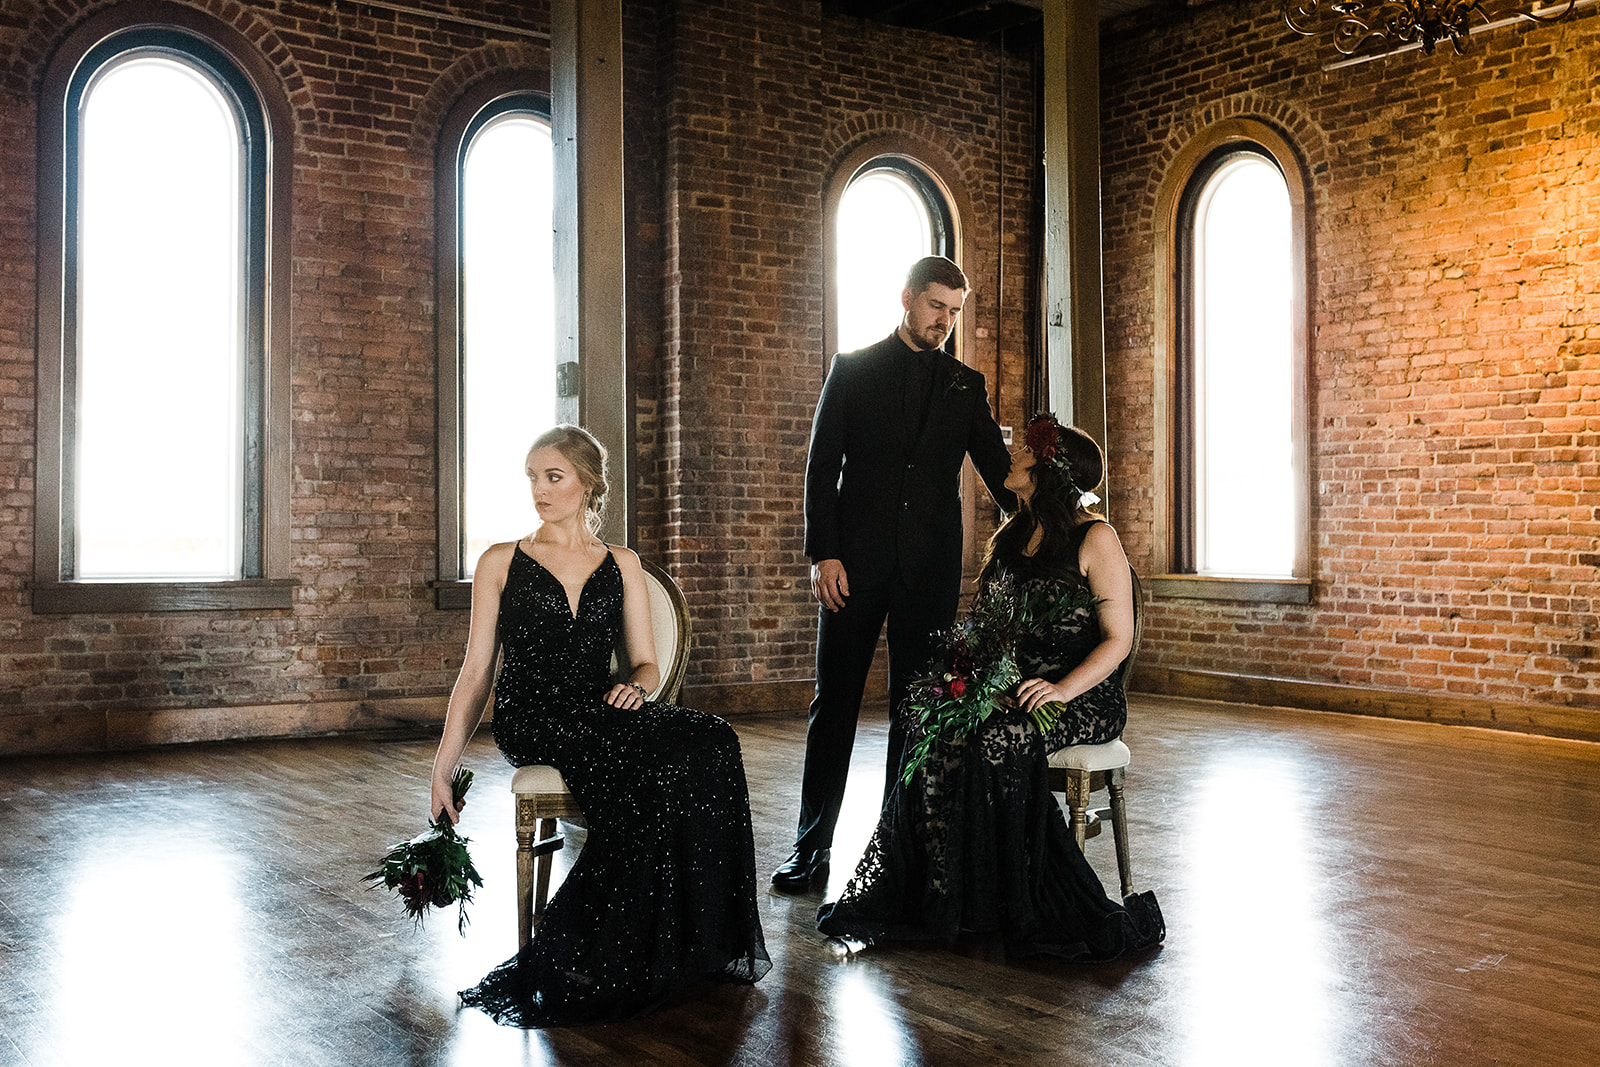 Bridal party members pose in black dresses in front of a wall of exposed brick.